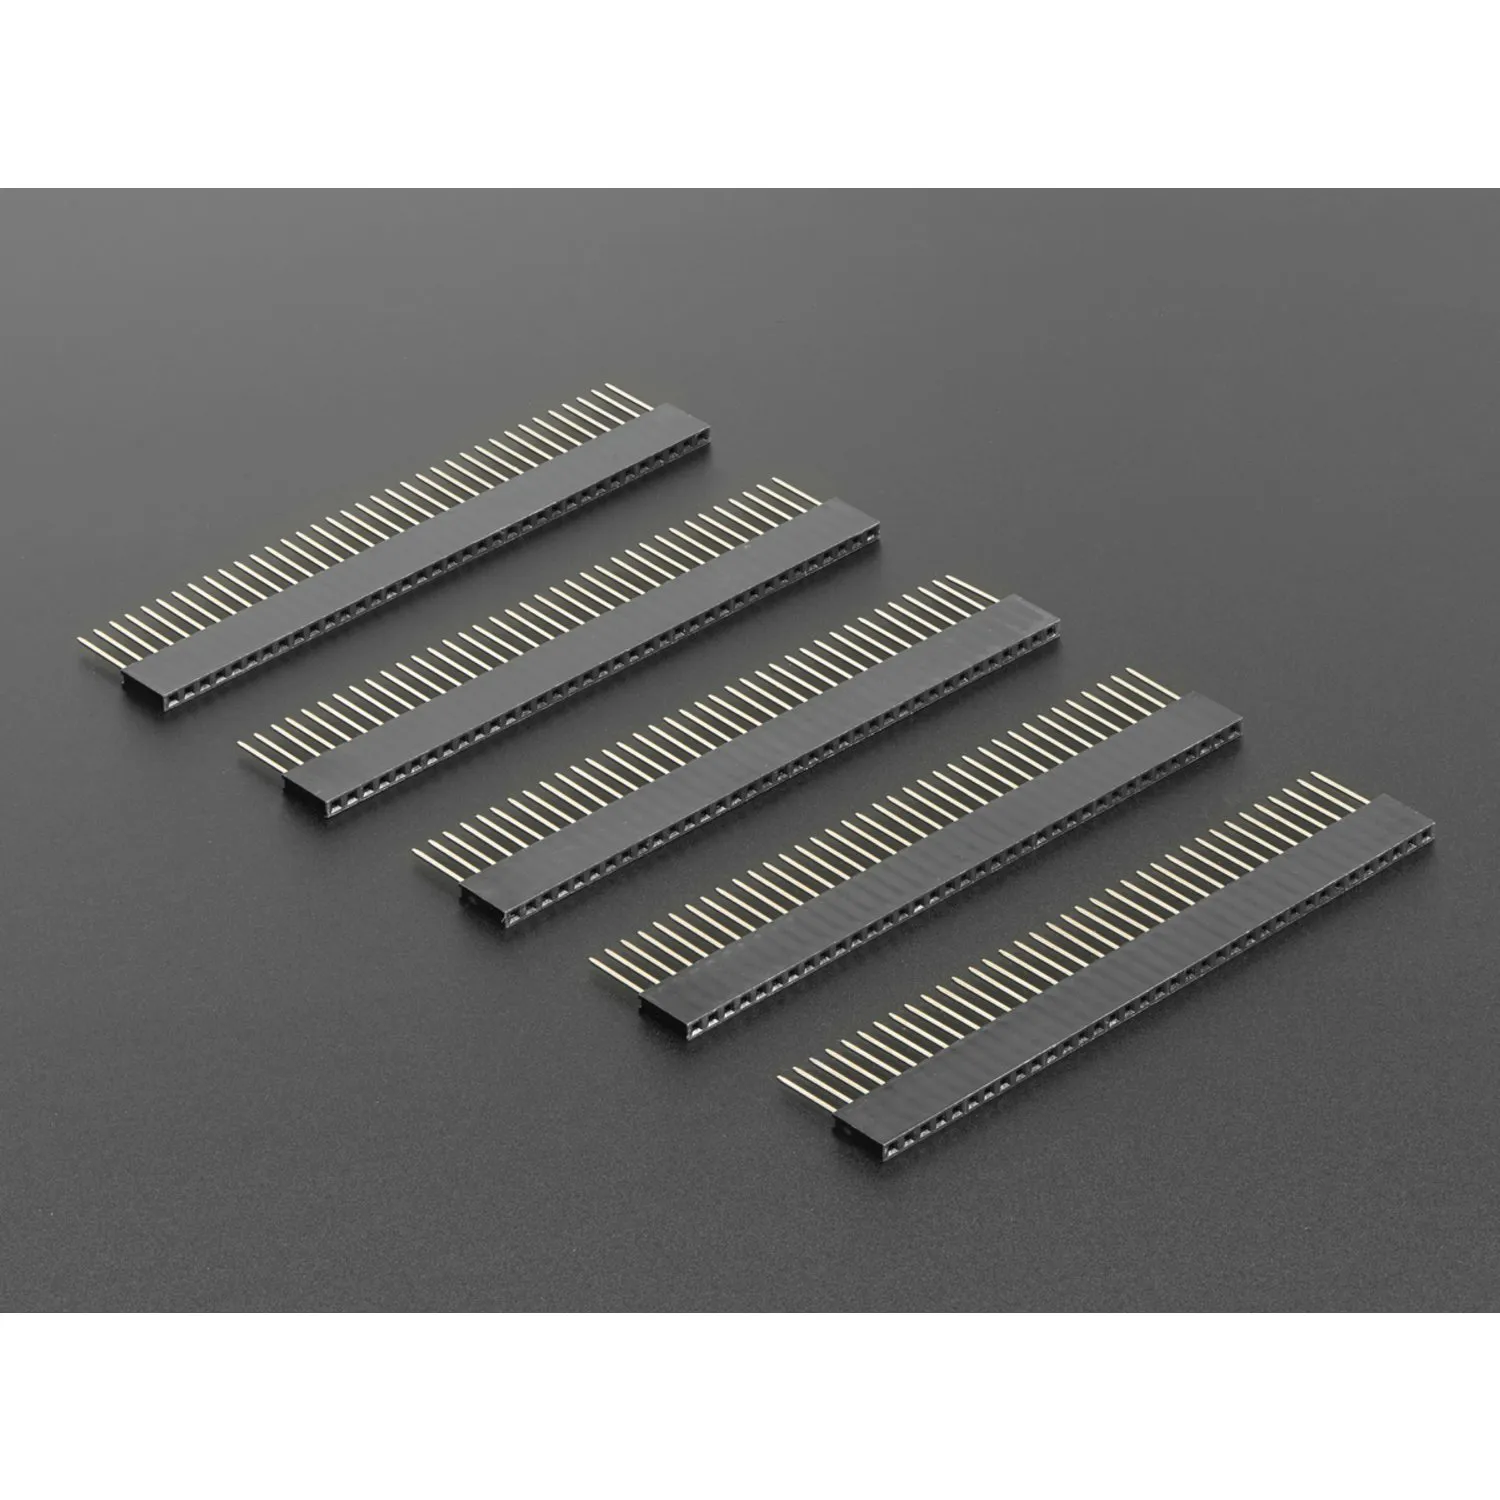 Photo of 36-pin Stacking header - pack of 5!